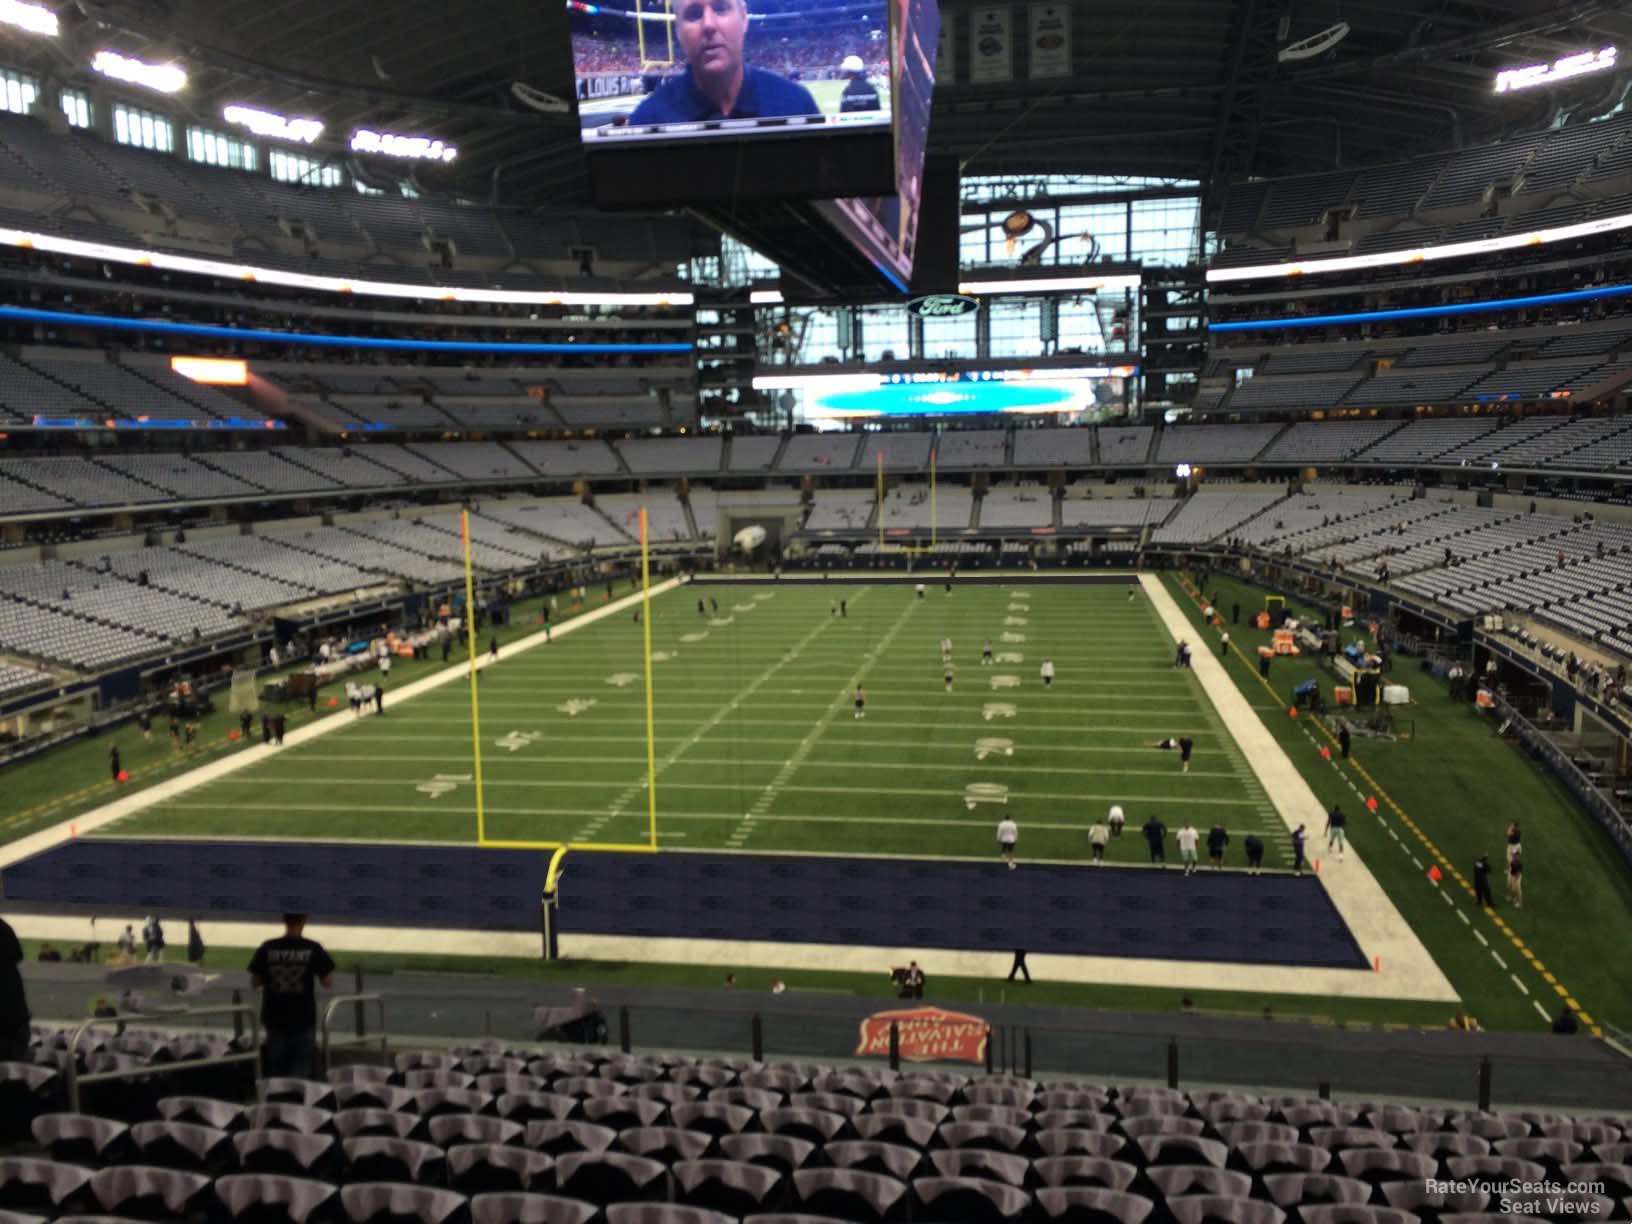 section 221, row 13 seat view  for football - at&t stadium (cowboys stadium)